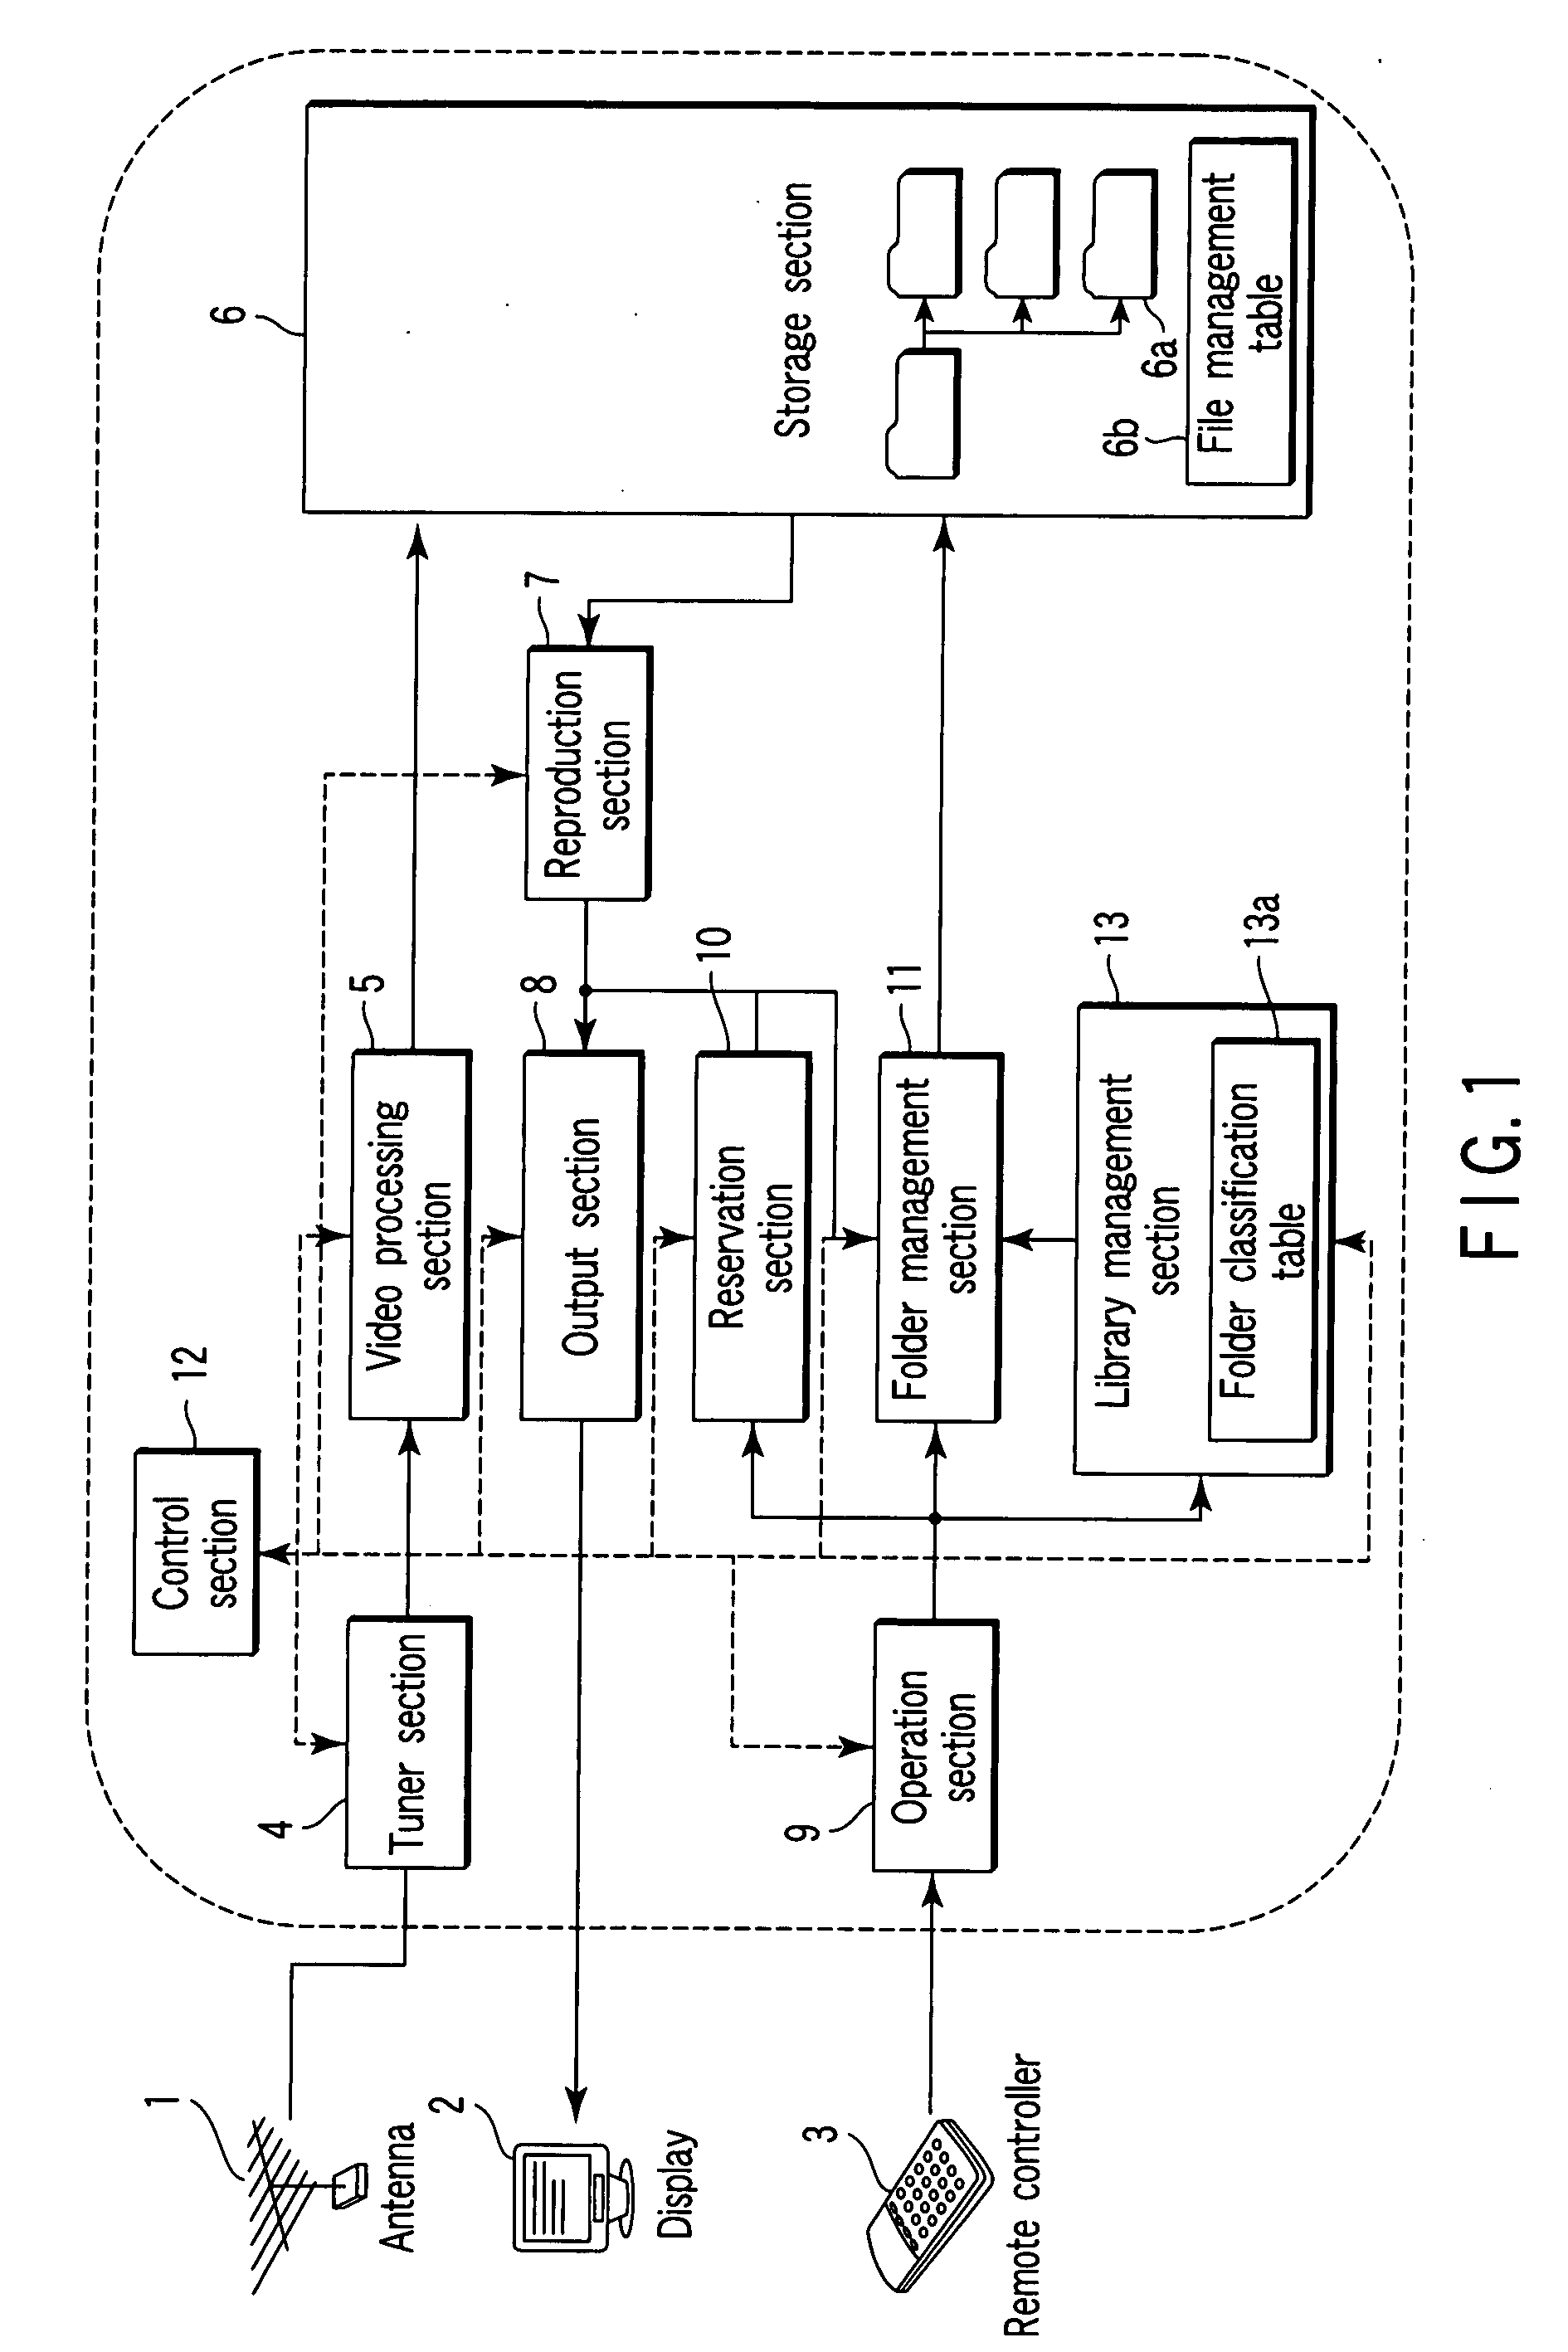 Viideo library management method and apparatus